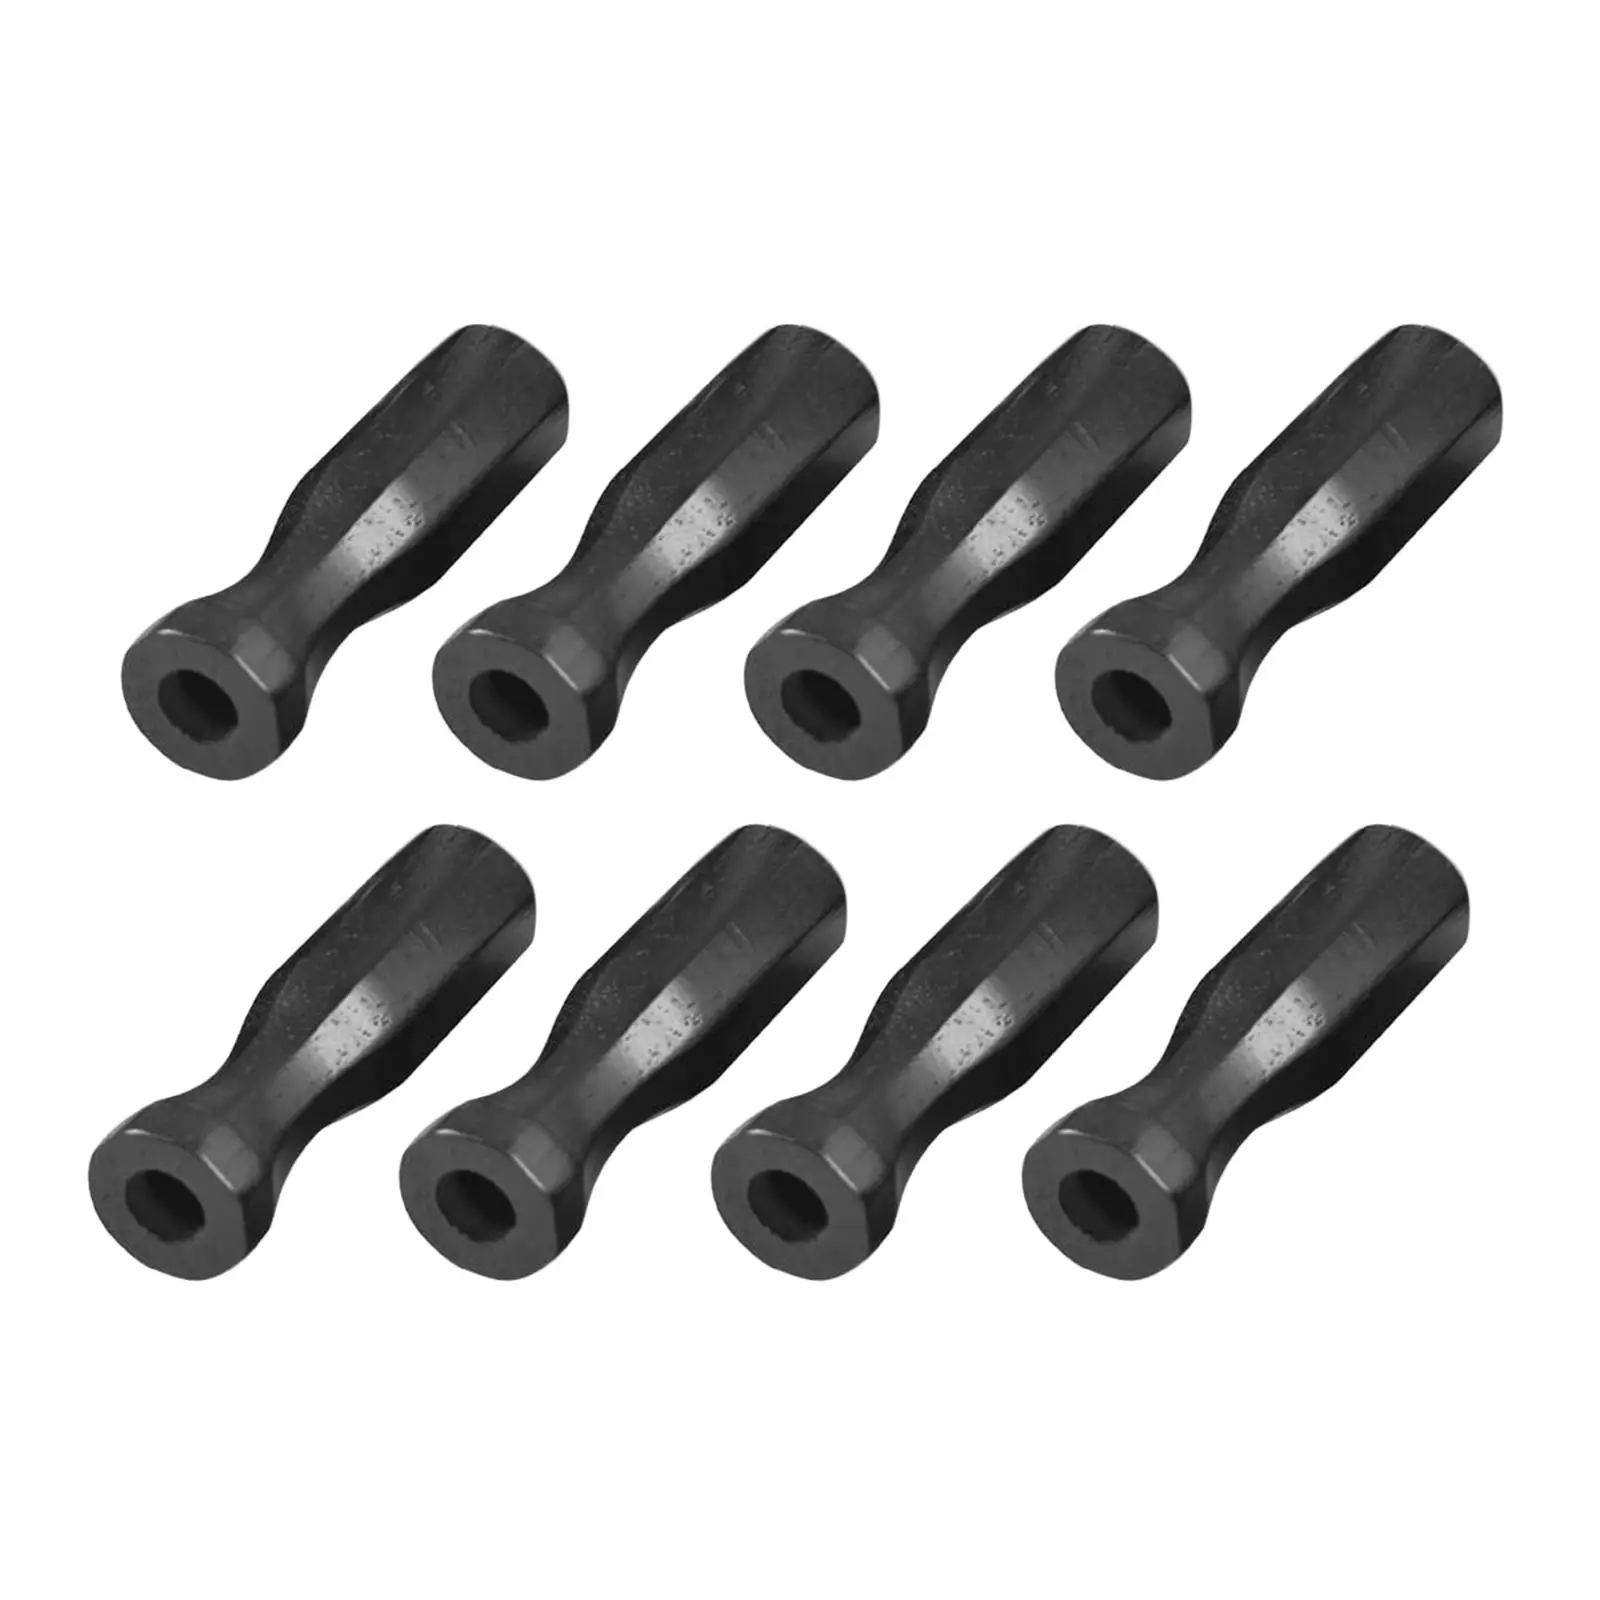 8 pieces soccer table grips, foosball grip, more portable, more durable